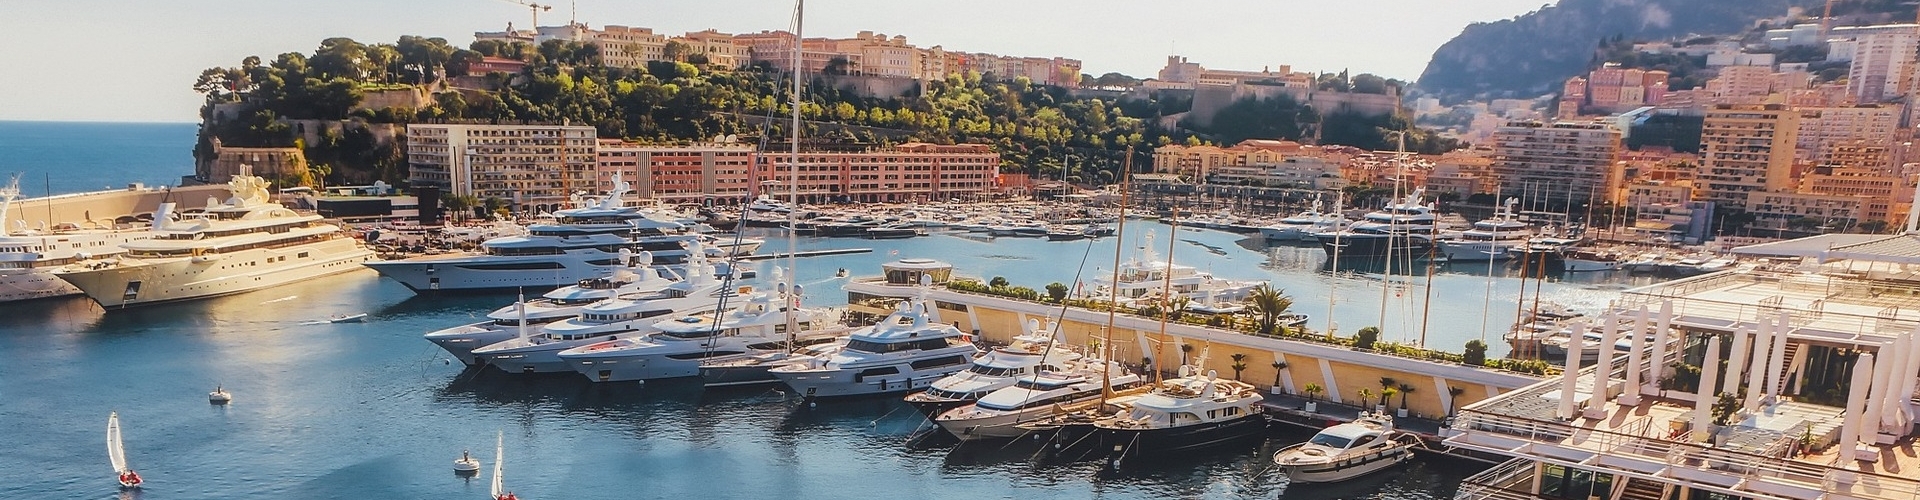 Luxe cruise Franse Riviera